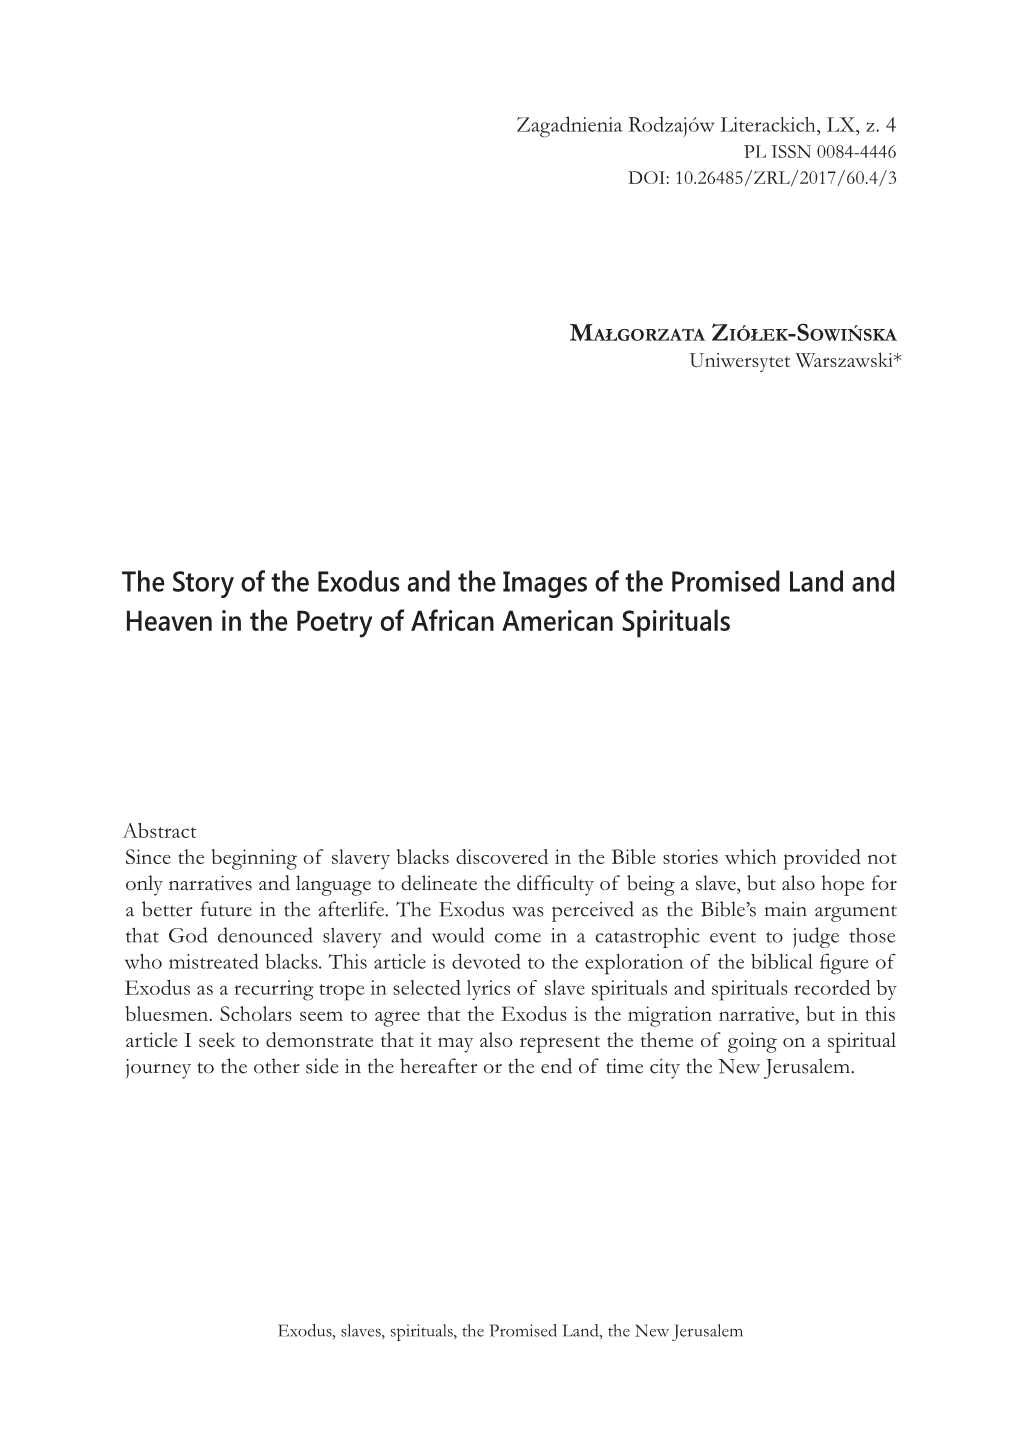 The Story of the Exodus and the Images of the Promised Land and Heaven in the Poetry of African American Spirituals